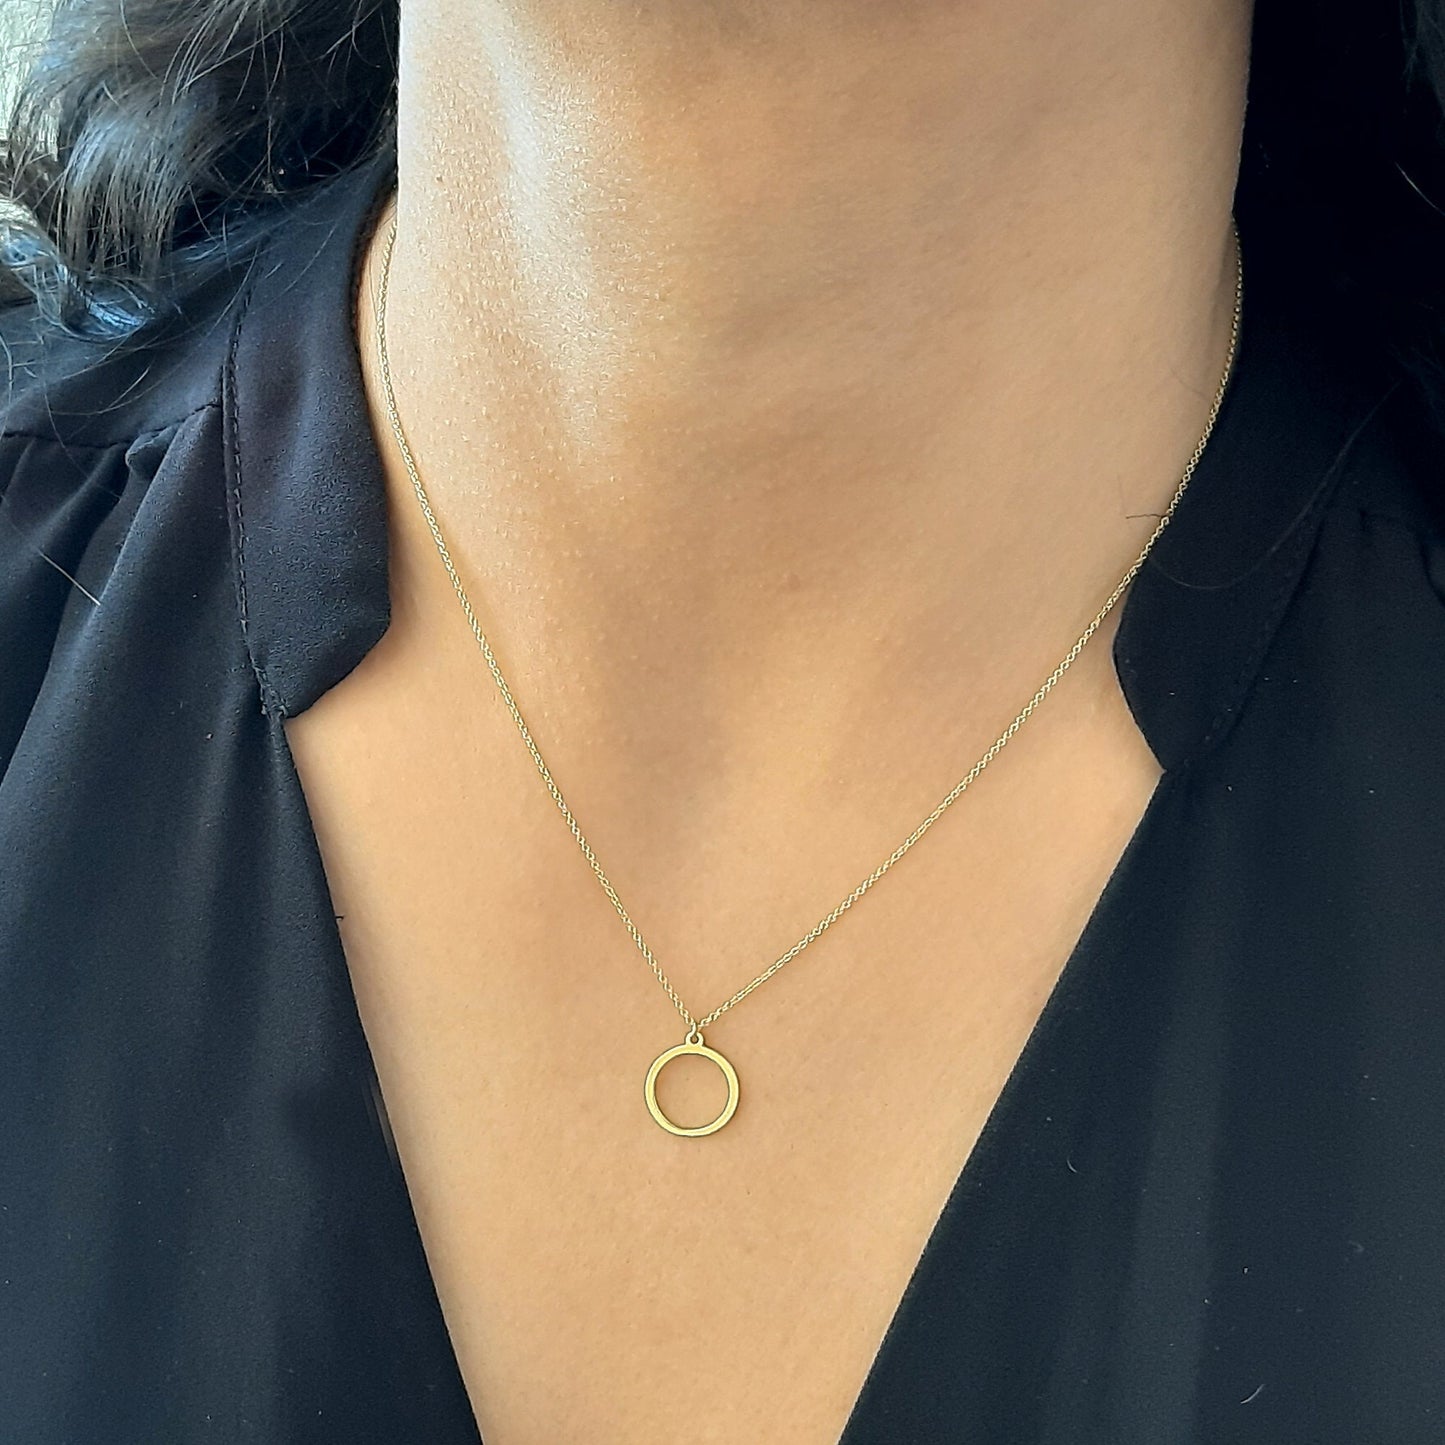 14k Yellow gold karma necklace, 14k solid gold thin chain, circle necklace , minimalist necklace, 14k gold necklace karma, layered necklace